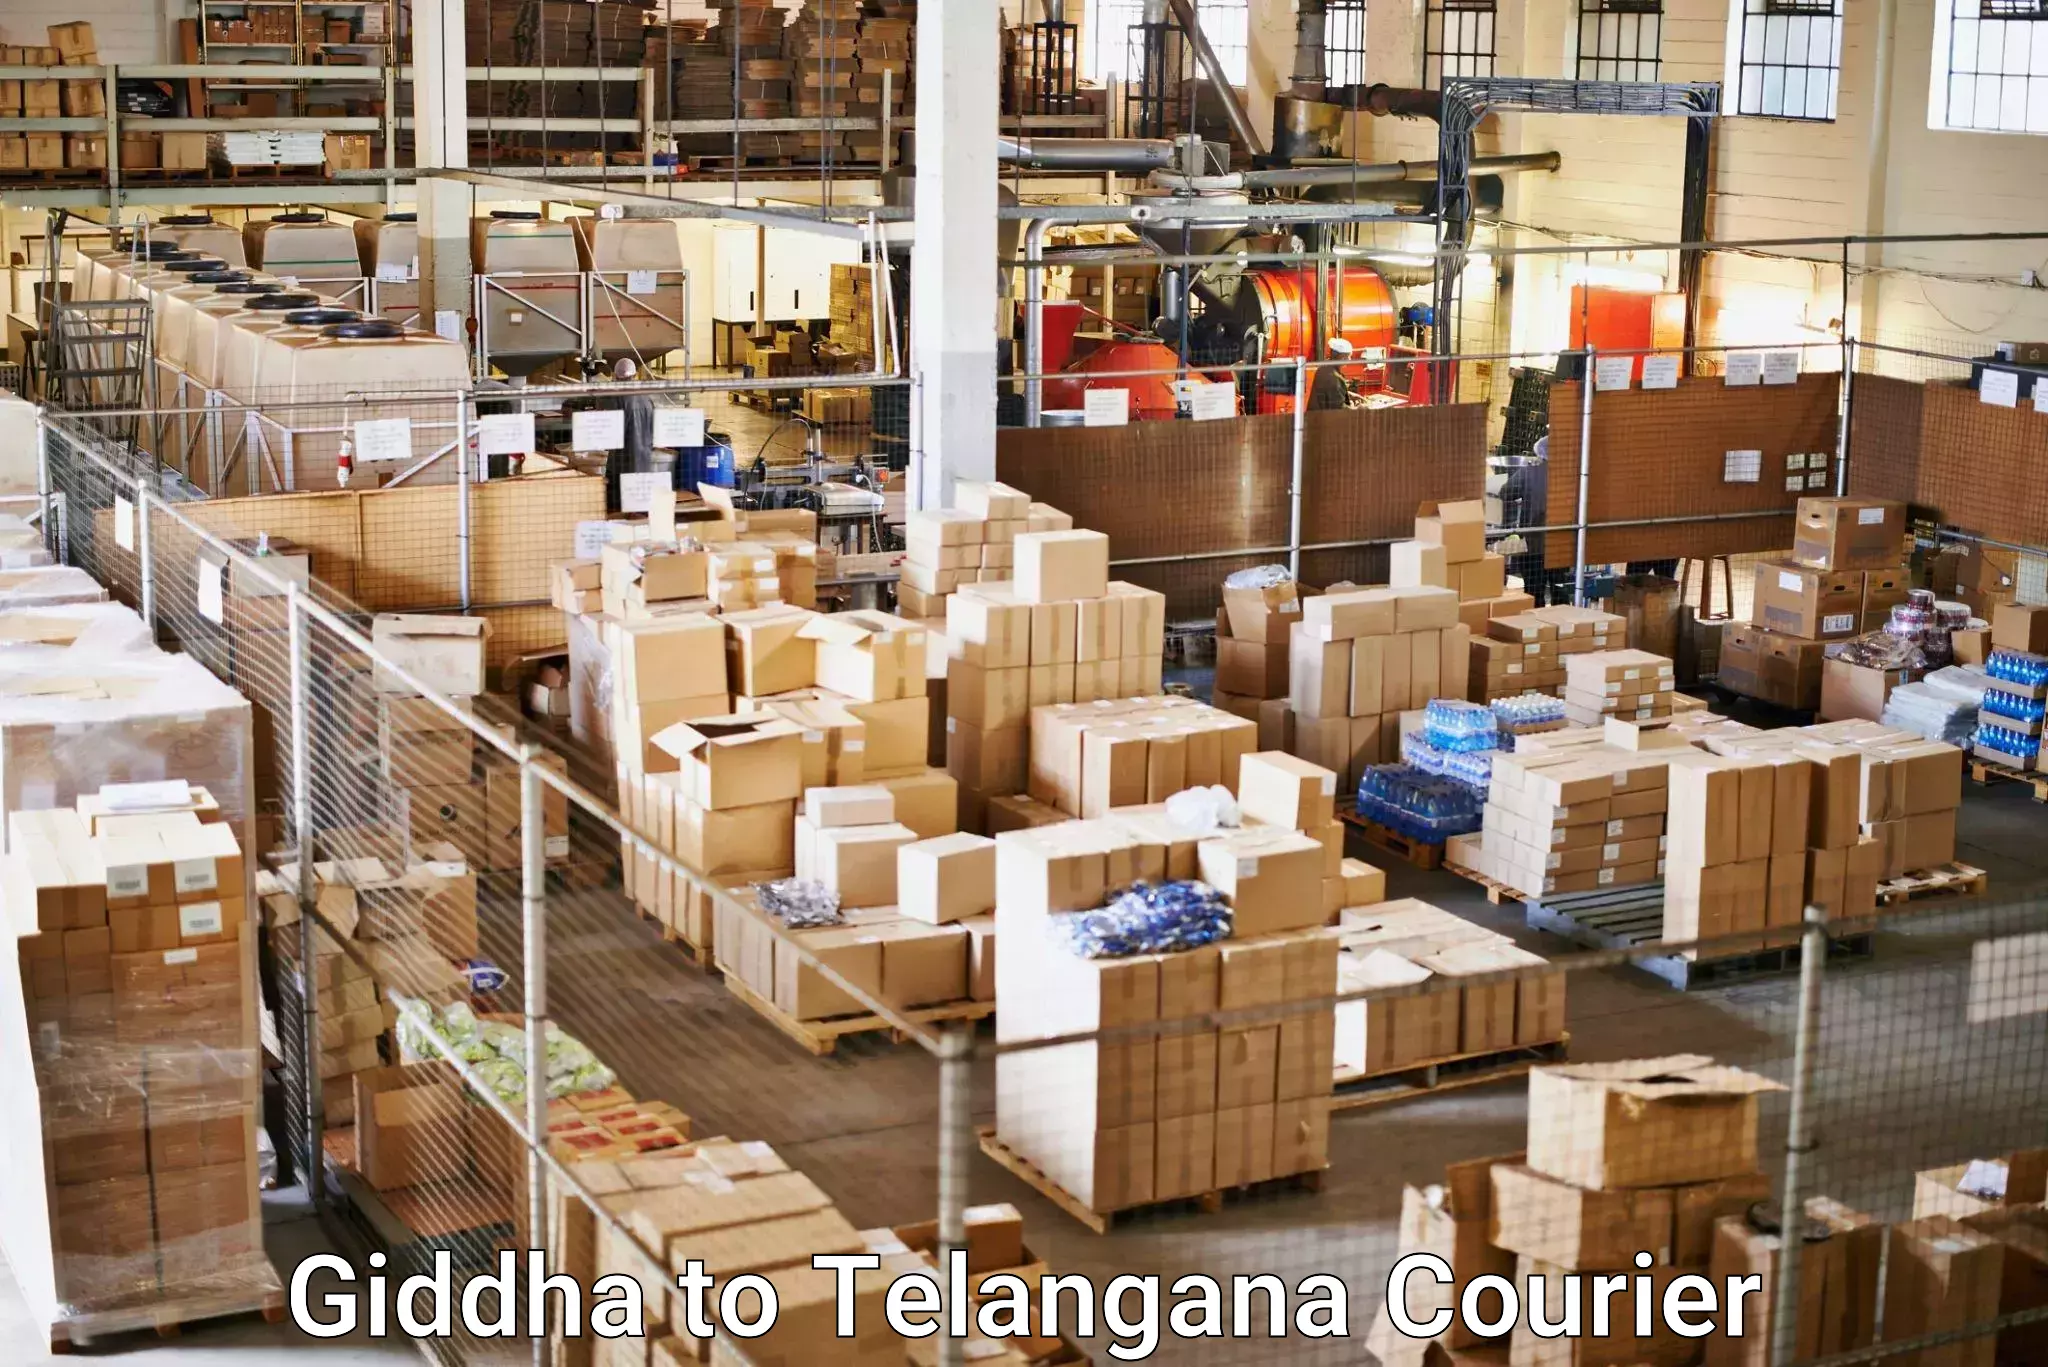 Supply chain delivery Giddha to Sathupally